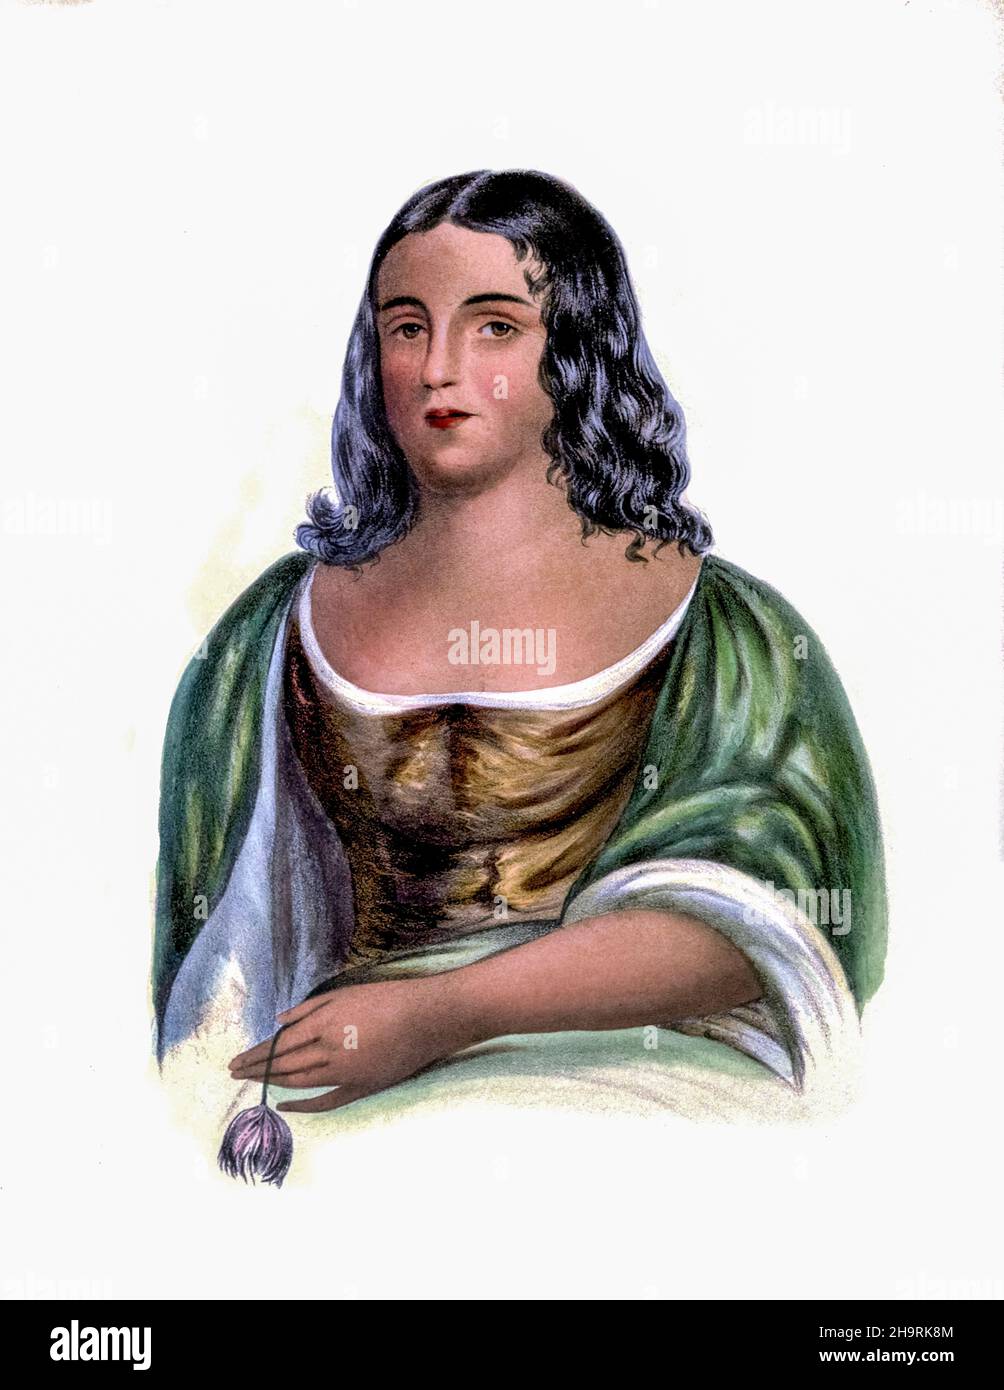 Portrait of PO-CA-HON-TAS [POCAHONTAS] born Amonute, known as Matoaka, c. 1596 – March 1617) was a Native American woman, belonging to the Powhatan people, notable for her association with the colonial settlement at Jamestown, Virginia. She was the daughter of Powhatan, the paramount chief of a network of tributary tribes in the Tsenacommacah, encompassing the Tidewater region of Virginia. By Charles Bird King from History of the Indian Tribes of North America ca. 1837-1844, hand-colored lithograph on paper, Published by McKenney and Hall Stock Photo